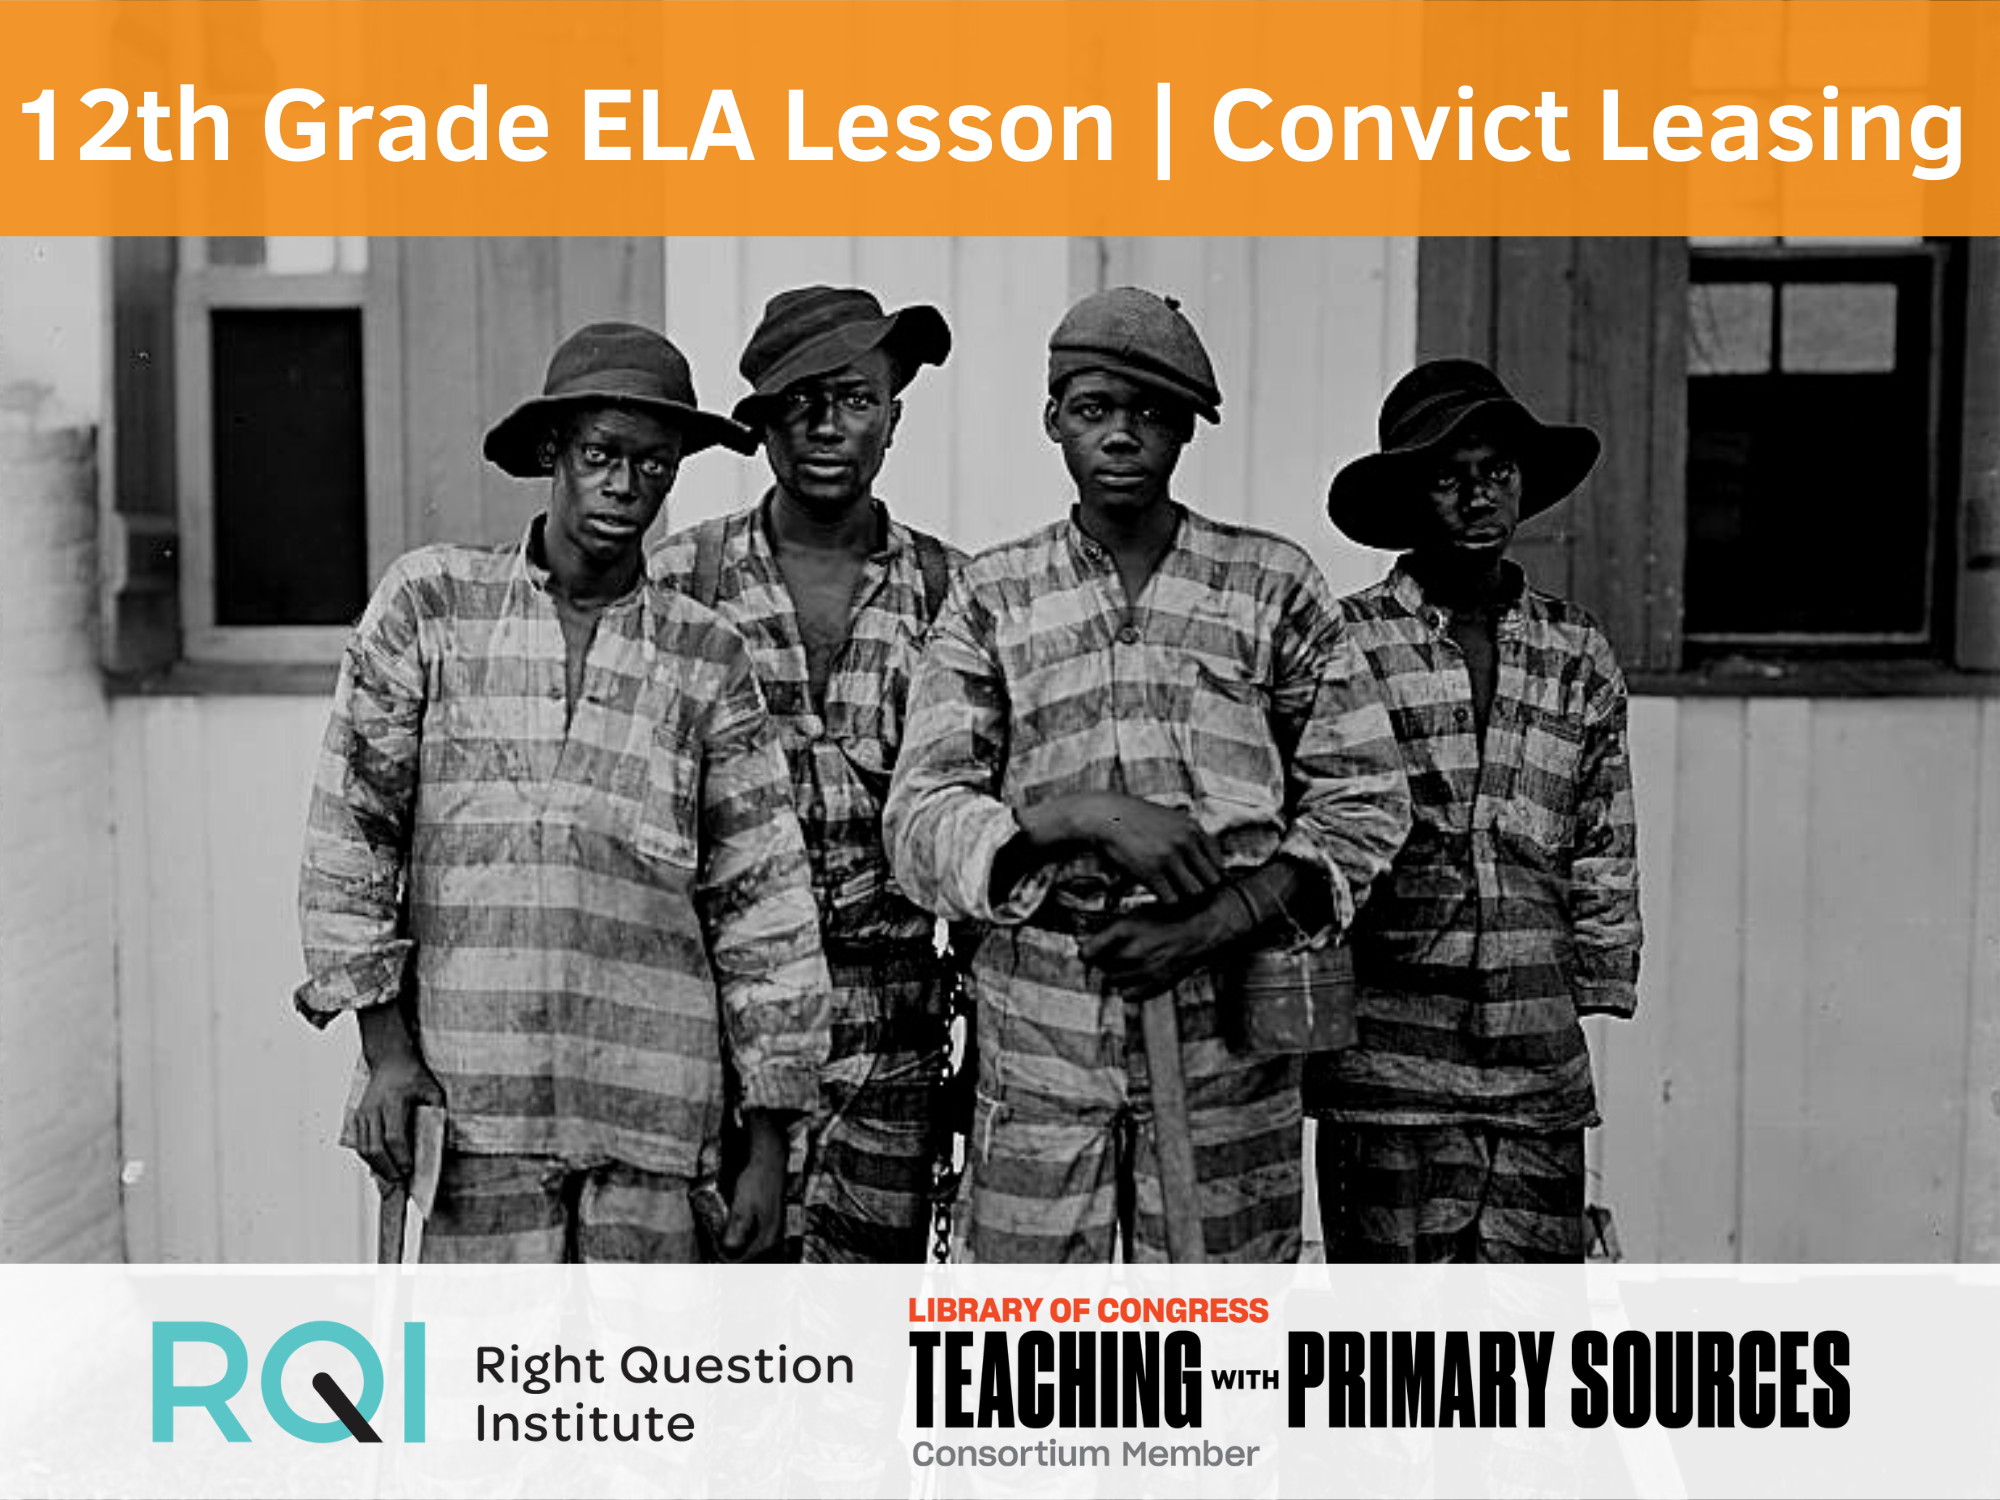 Lesson Snapshot: QFT & Primary Sources in a 12th-Grade ELA Classroom